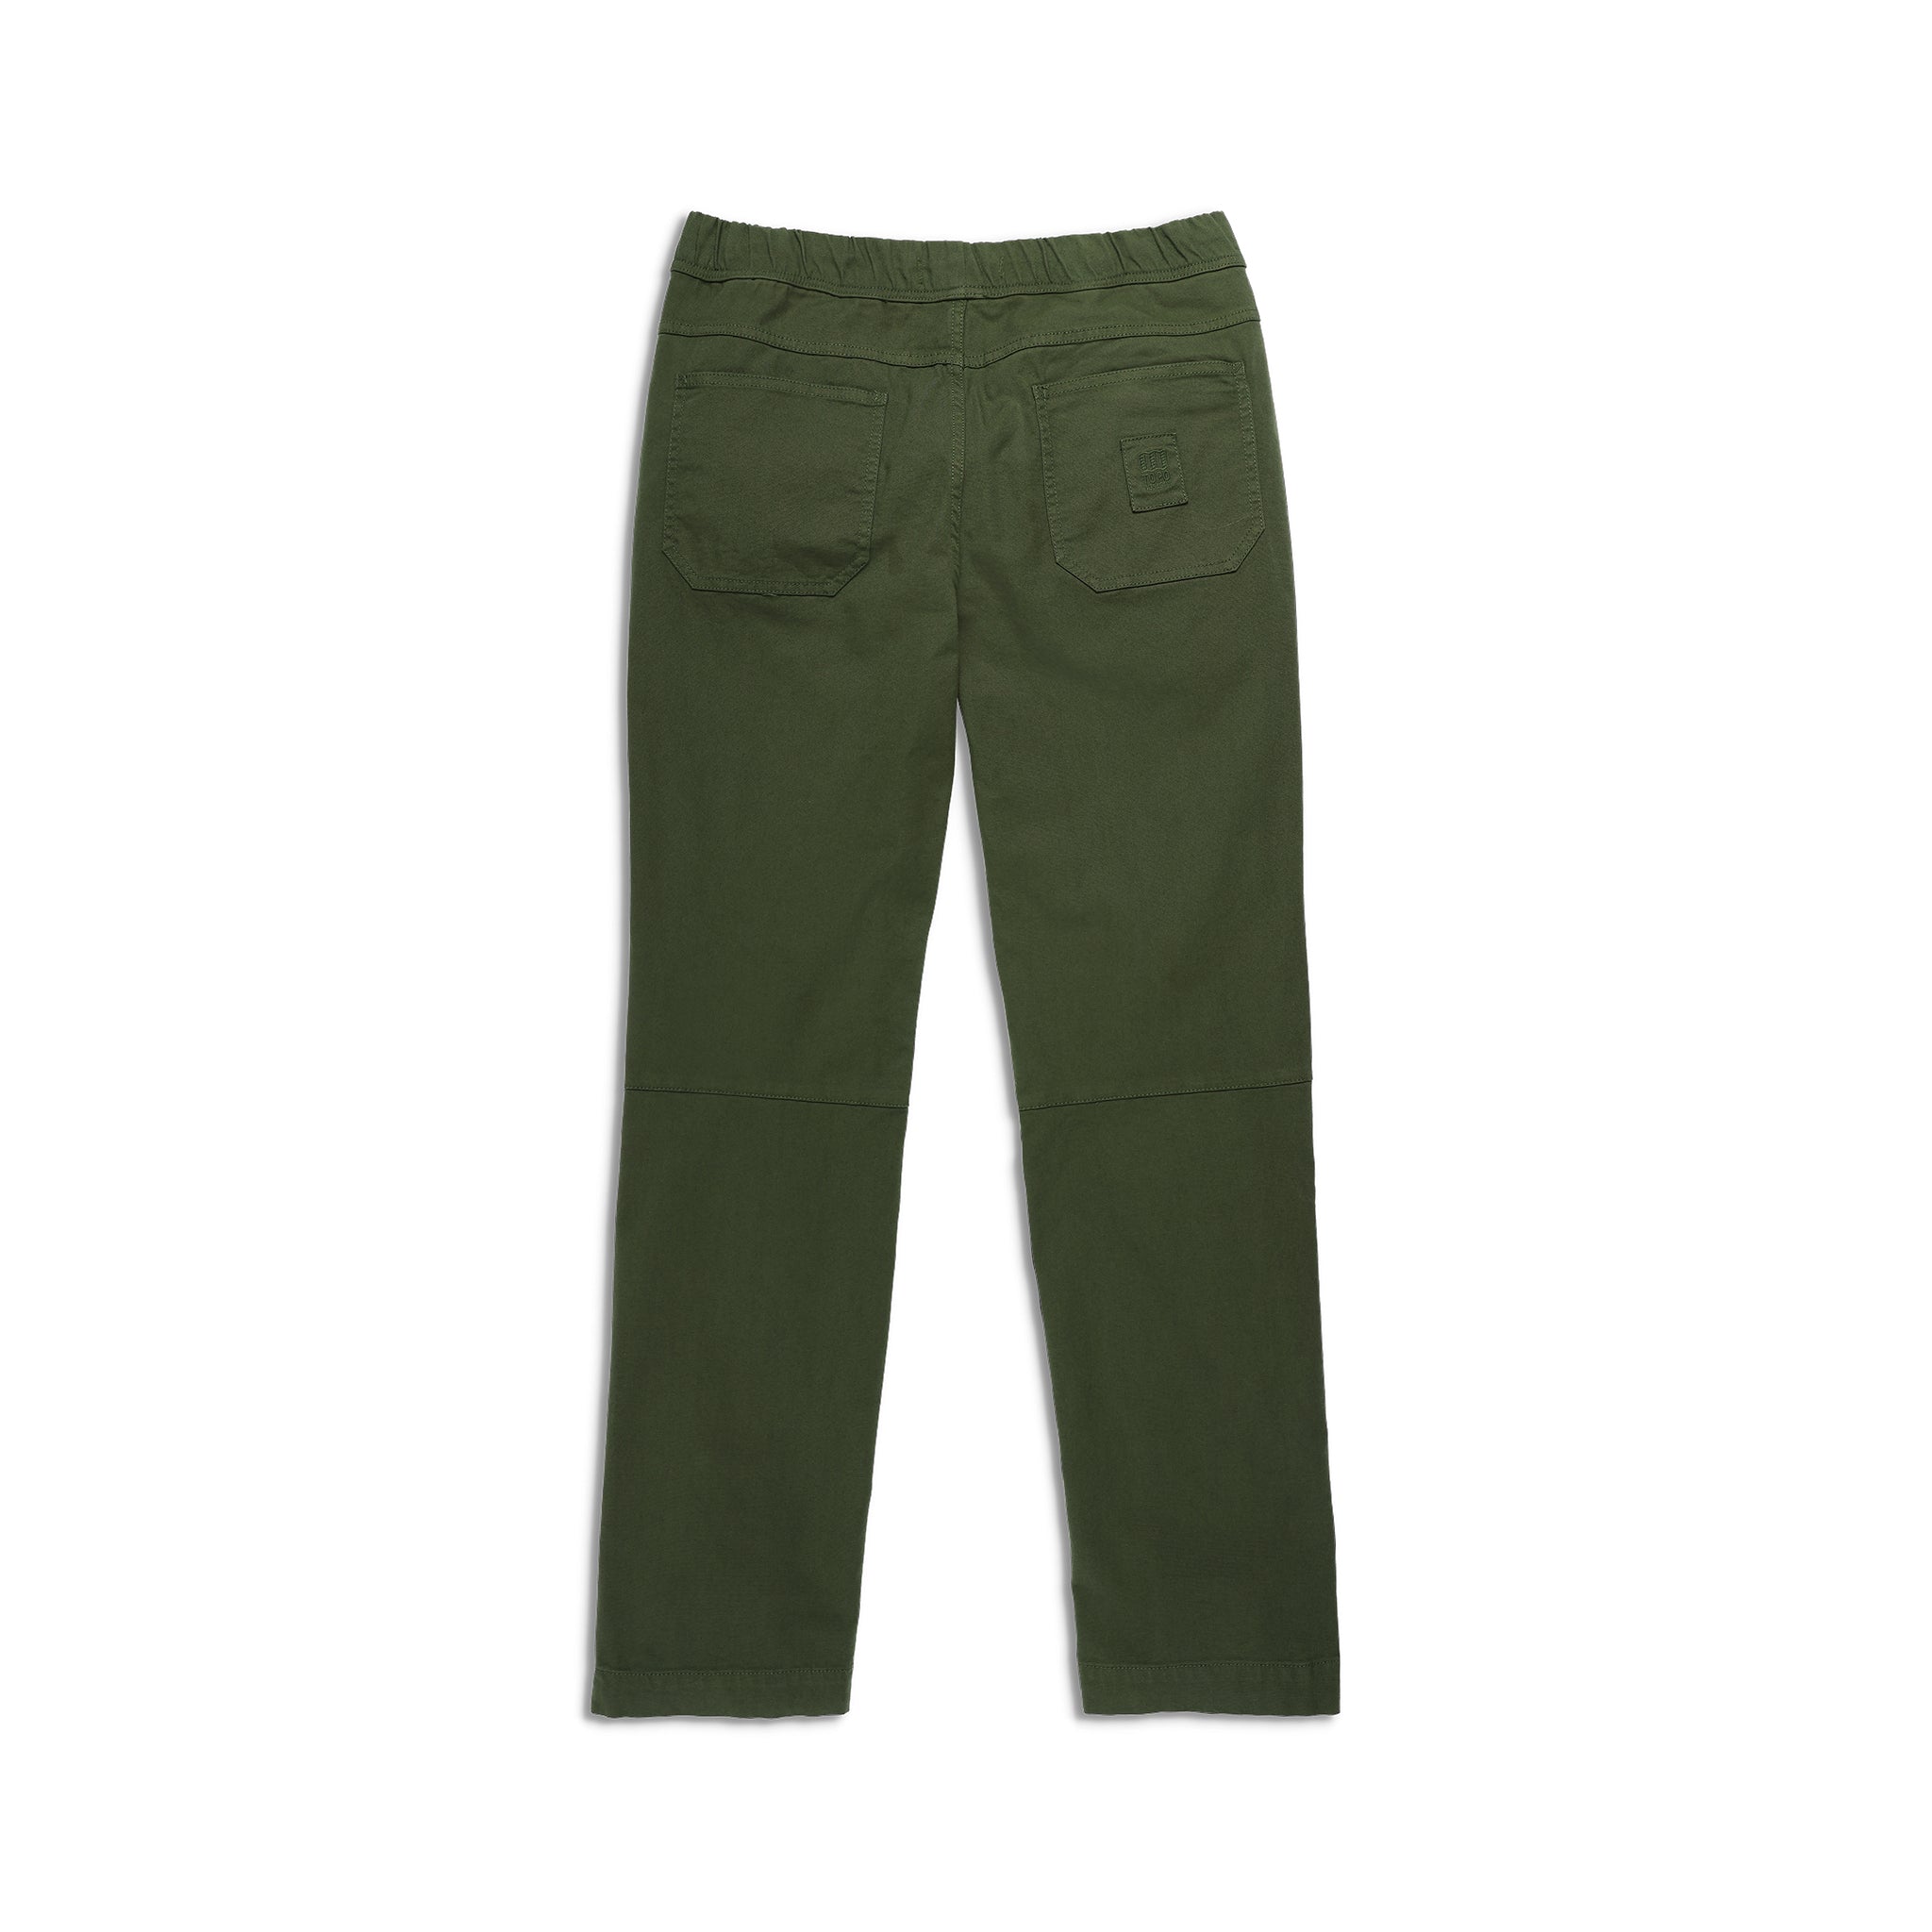 Back View of Topo Designs Dirt Pants Classic - Men's in "Olive"